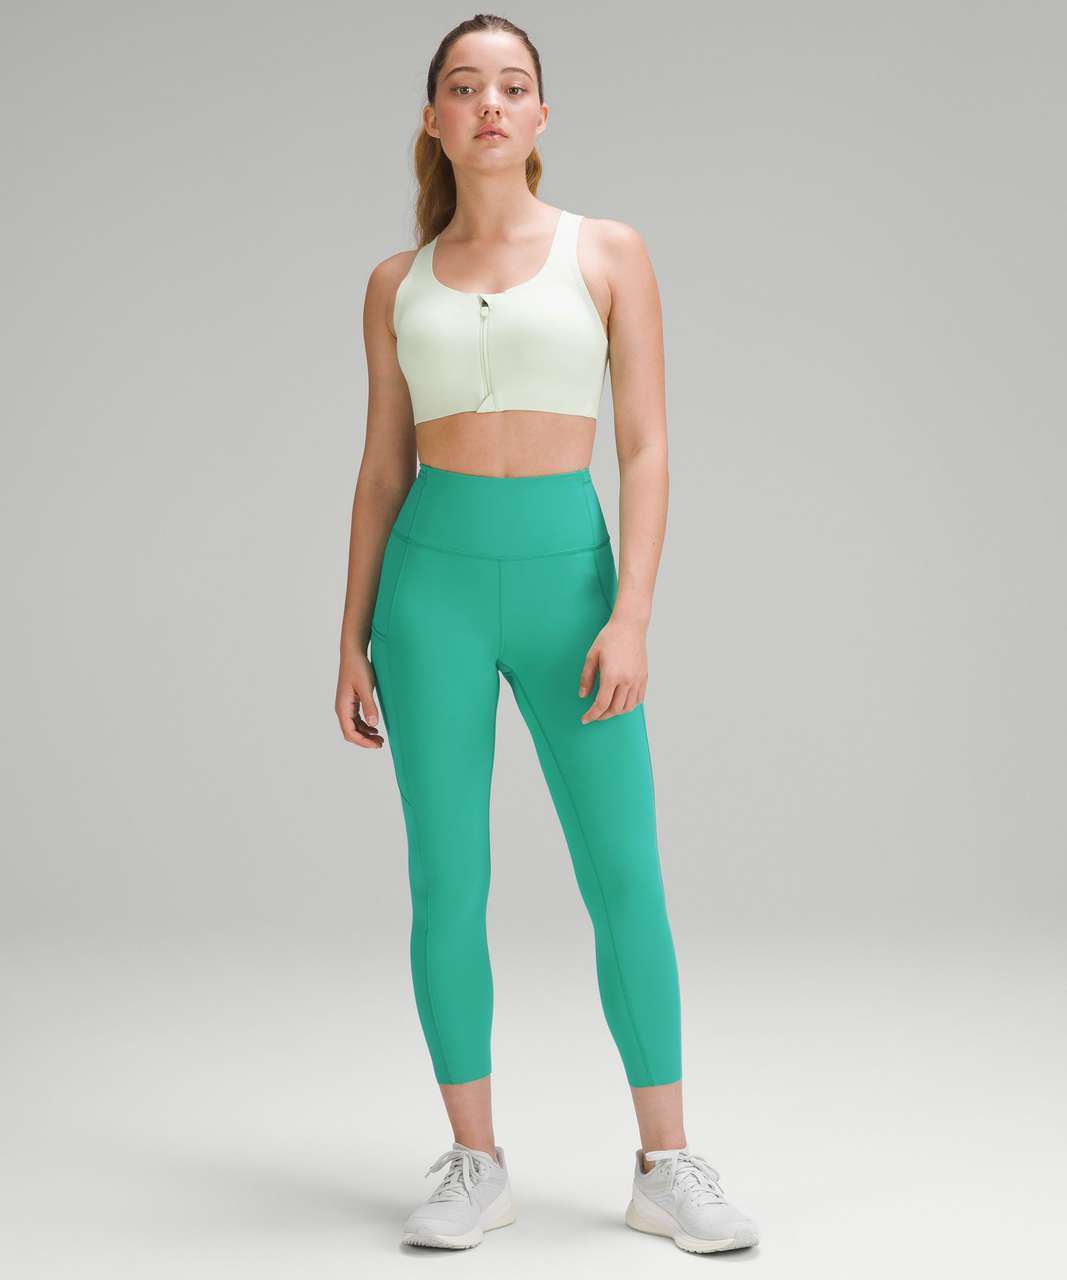 Lululemon Fast and Free High-Rise Crop 23" - Kelly Green